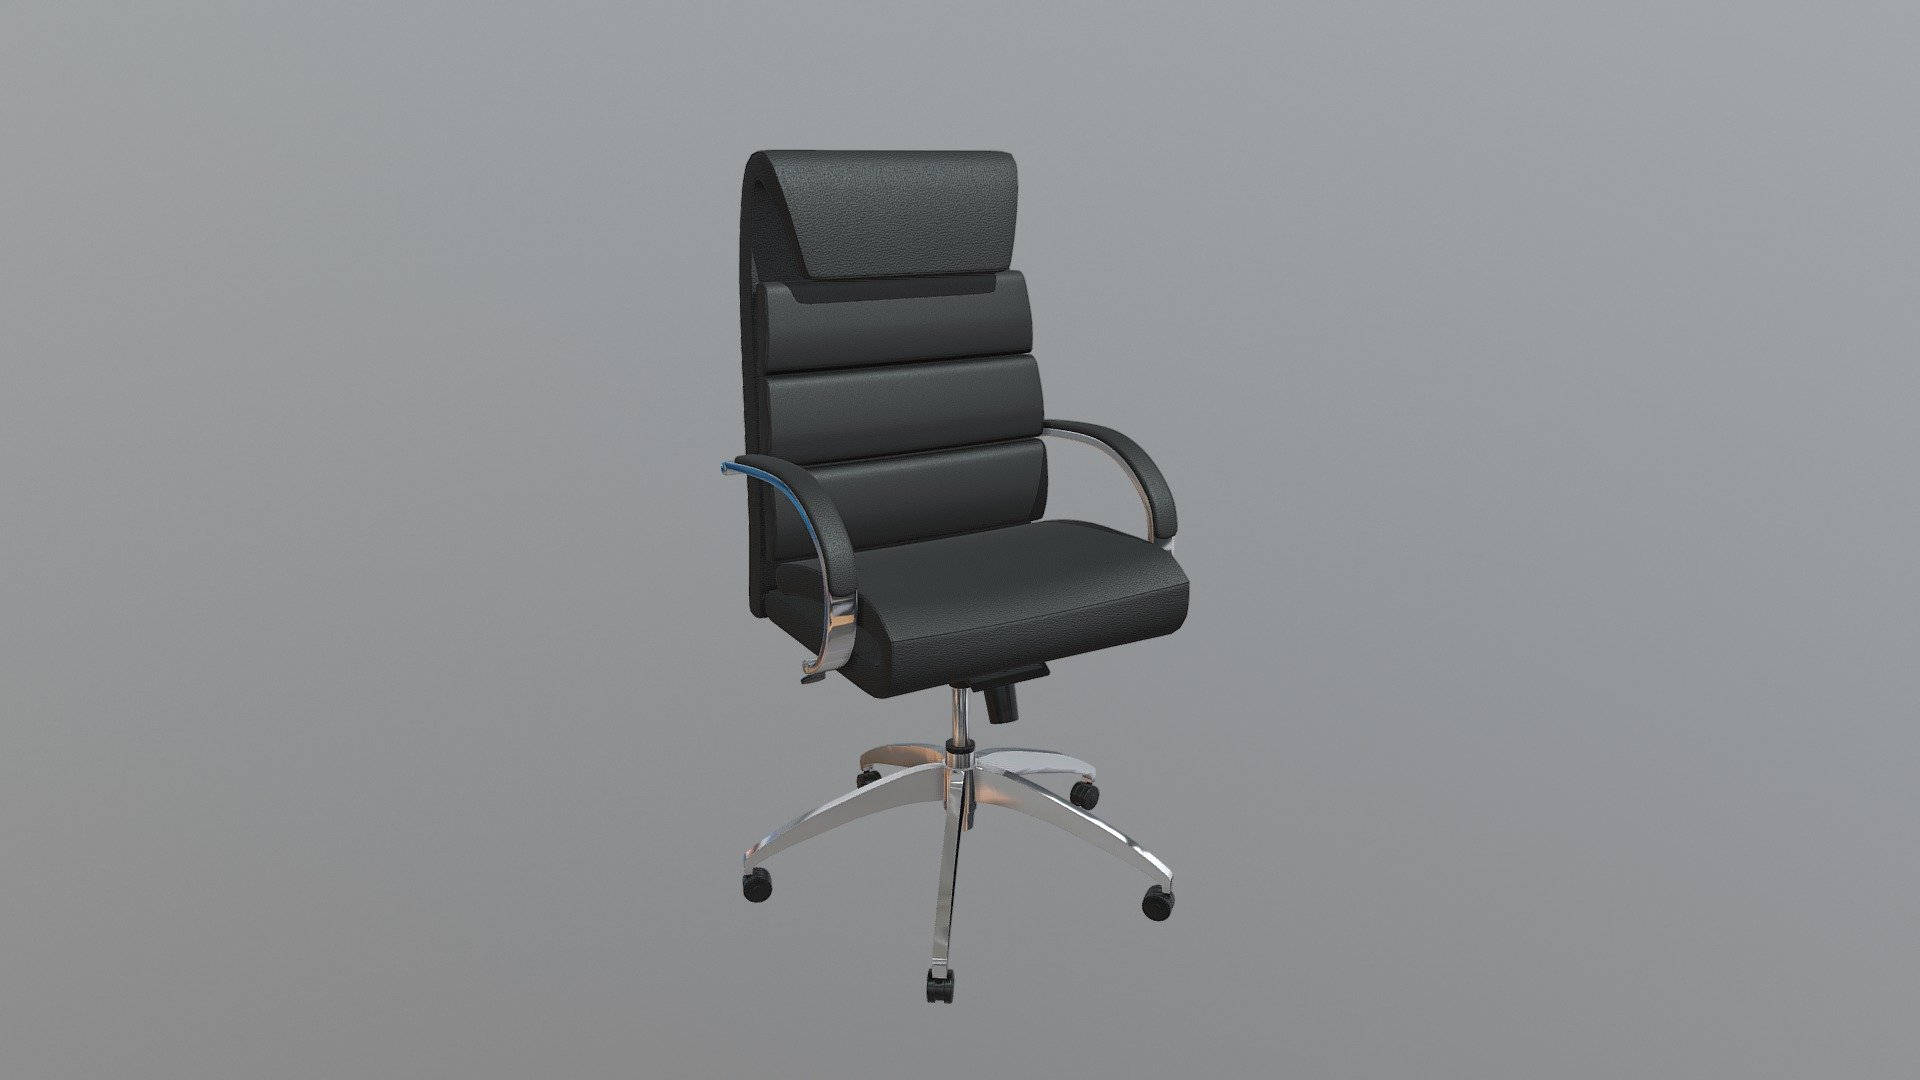 This chair has a leatherette wrapped seat and back cushions with chrome solid steel arms with leatherette pads. There is a height and tilt adjustment with a chrome steel rolling base. www.zuomod.com/lider-comfort-office-chair-black - Lider Comfort Office Chair Black - 205315 - Buy Royalty Free 3D model by Zuo Modern (@zuo) 3d model